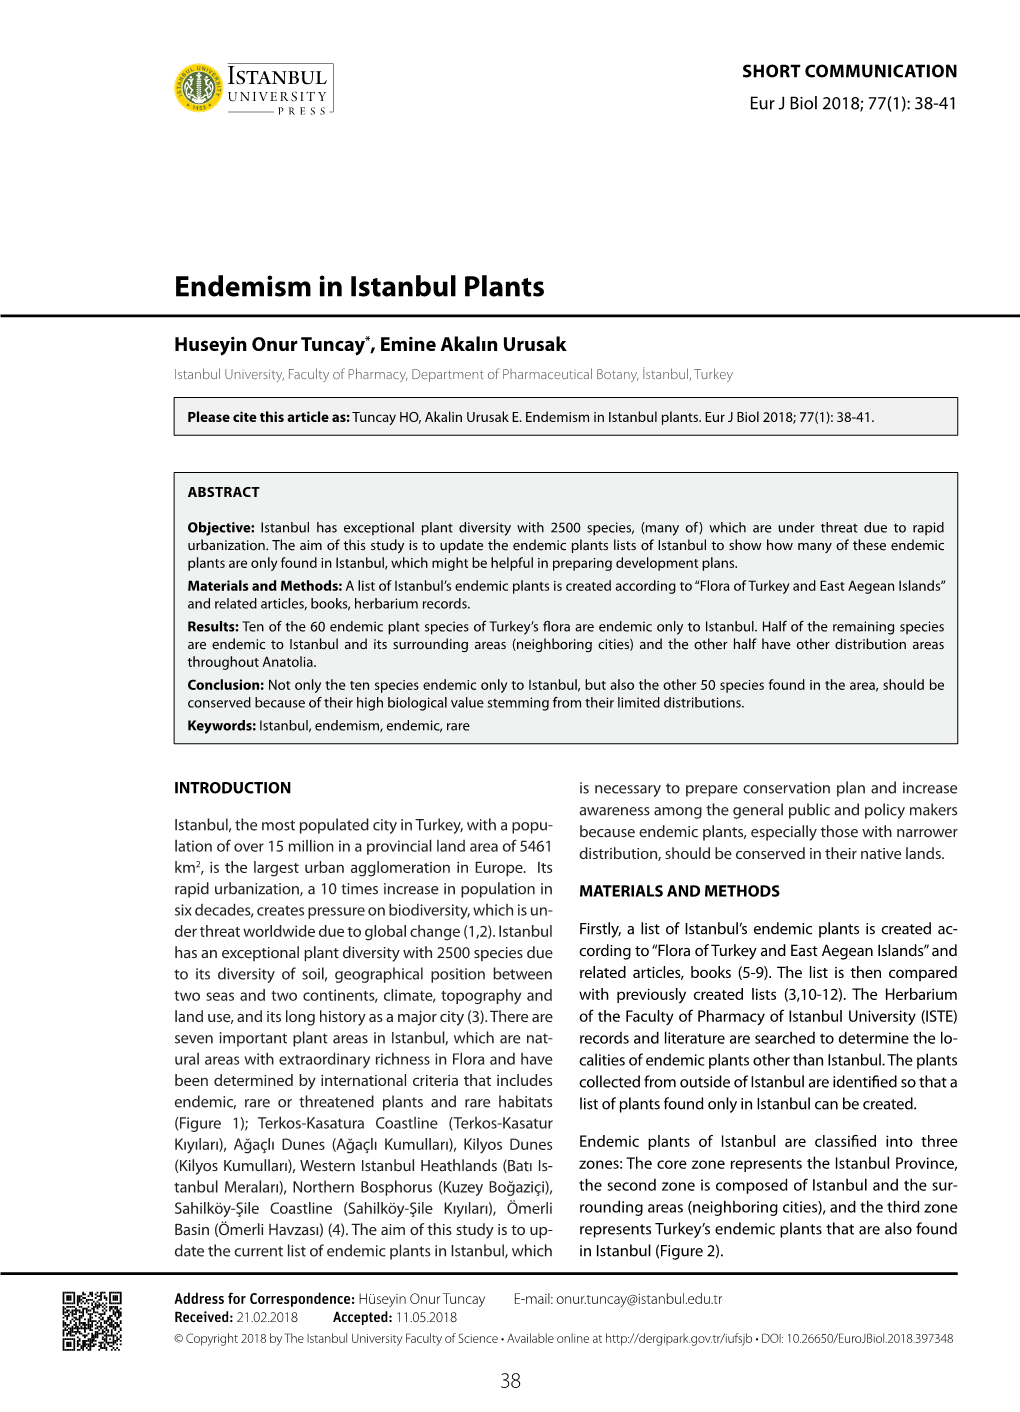 Endemism in Istanbul Plants